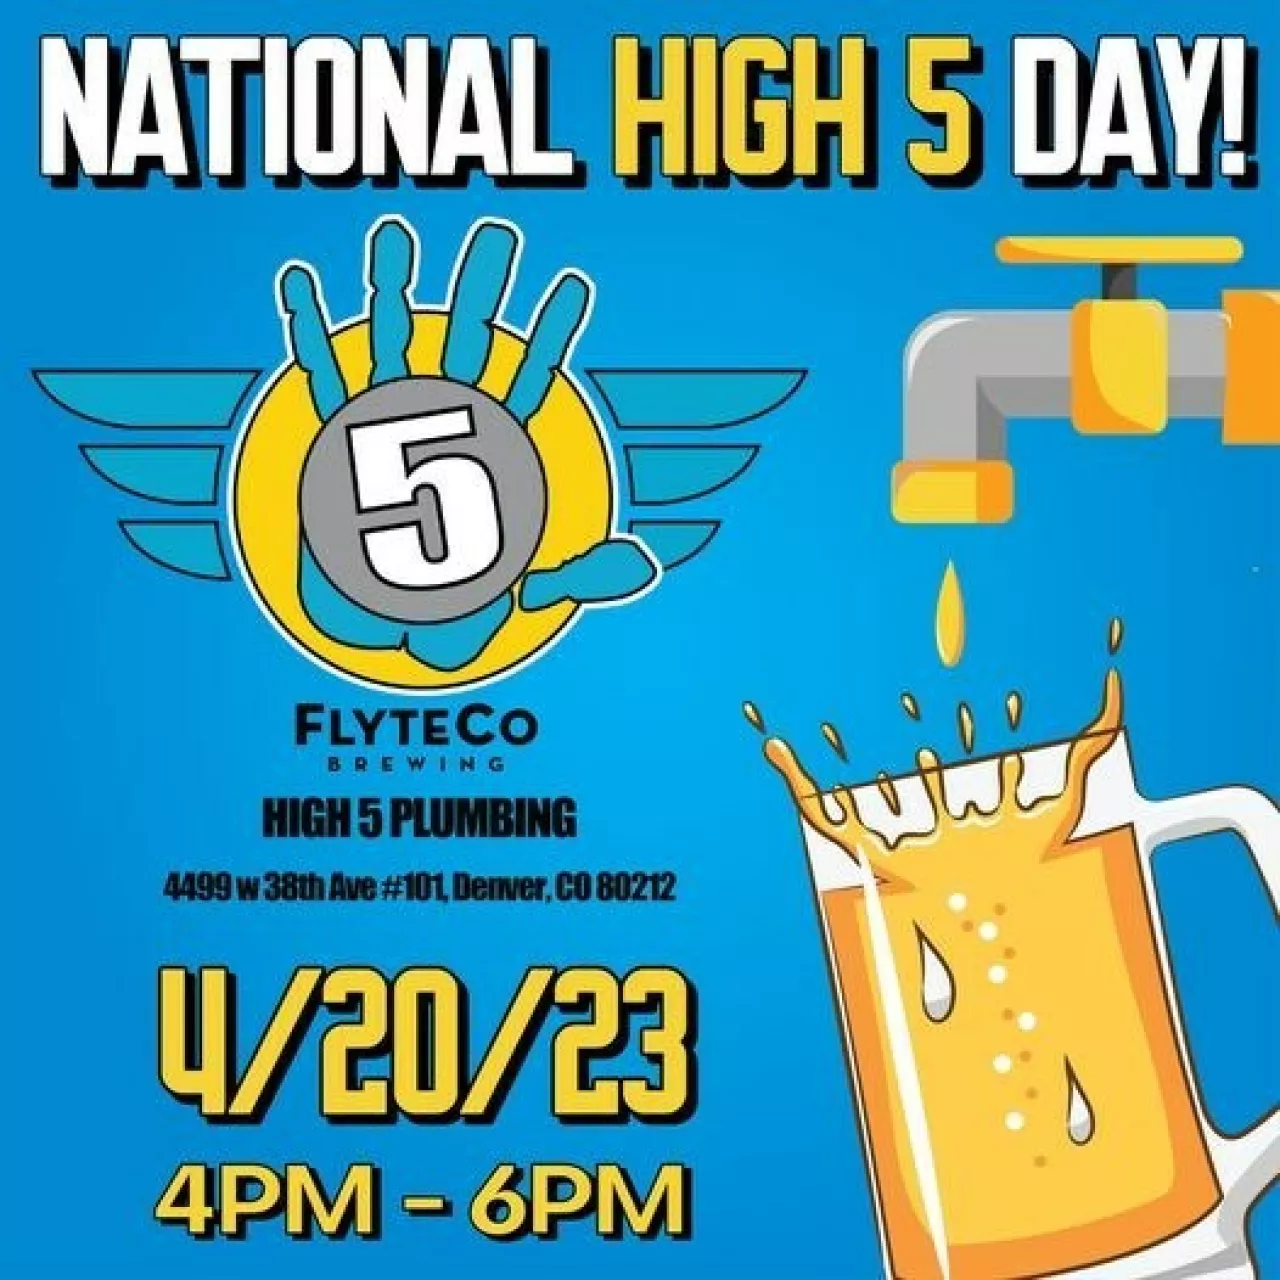 High 5 Plumbing is welcoming homeowners and clients alike to its National High Five Day event from 4-6 p.m. at FlyteCo Brewing on April 20. img#1